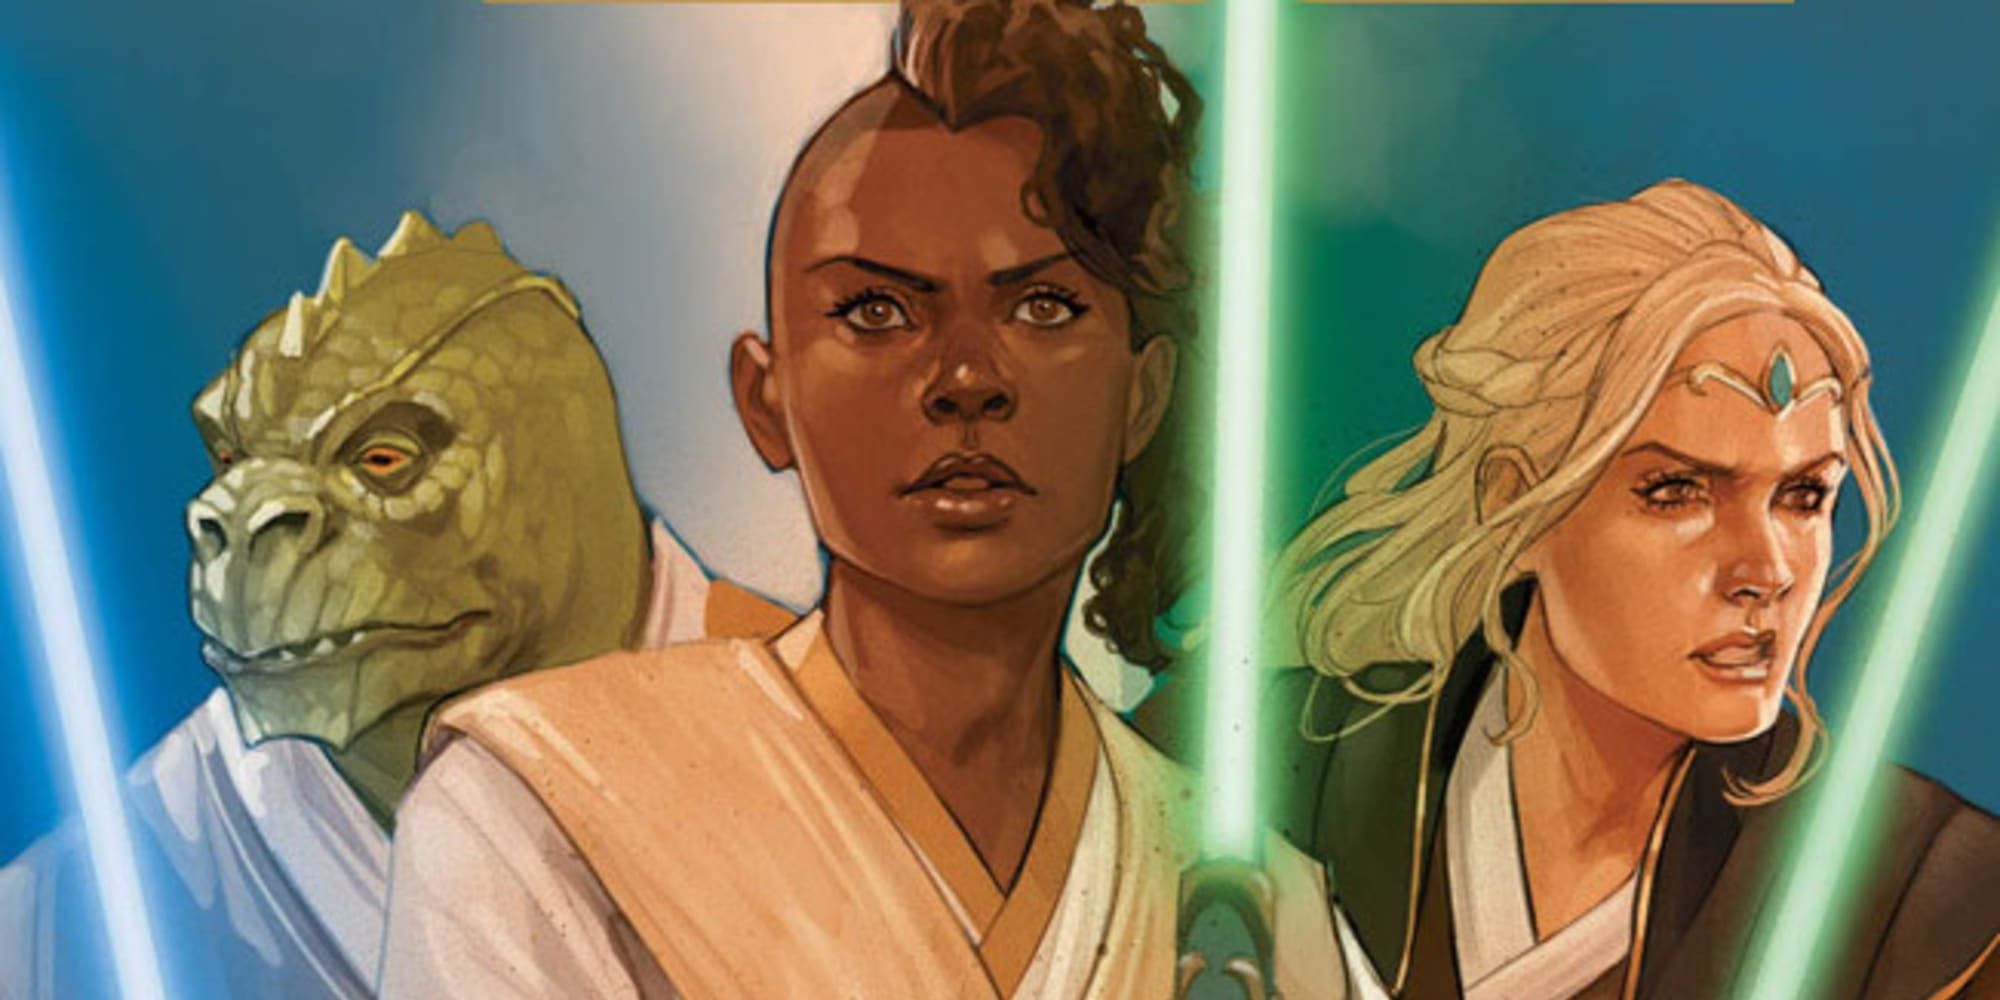 Star Wars: The High Republic #1, cover art by Phil Noto